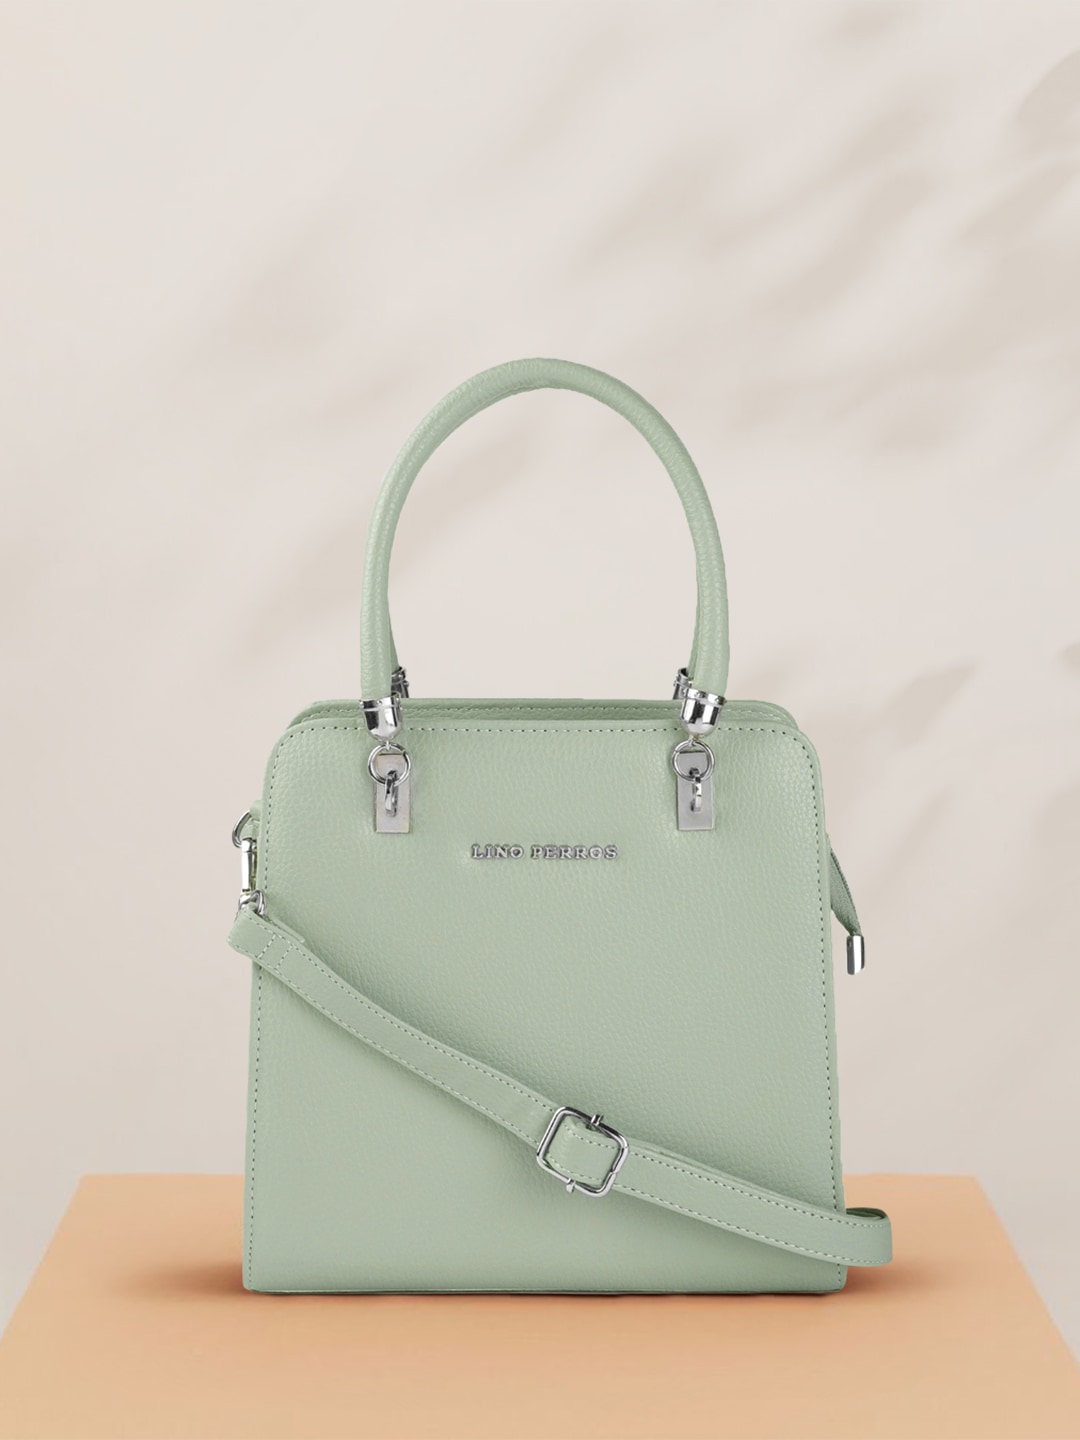 Lino Perros Sea Green Solid Structured Handheld Bag Price in India